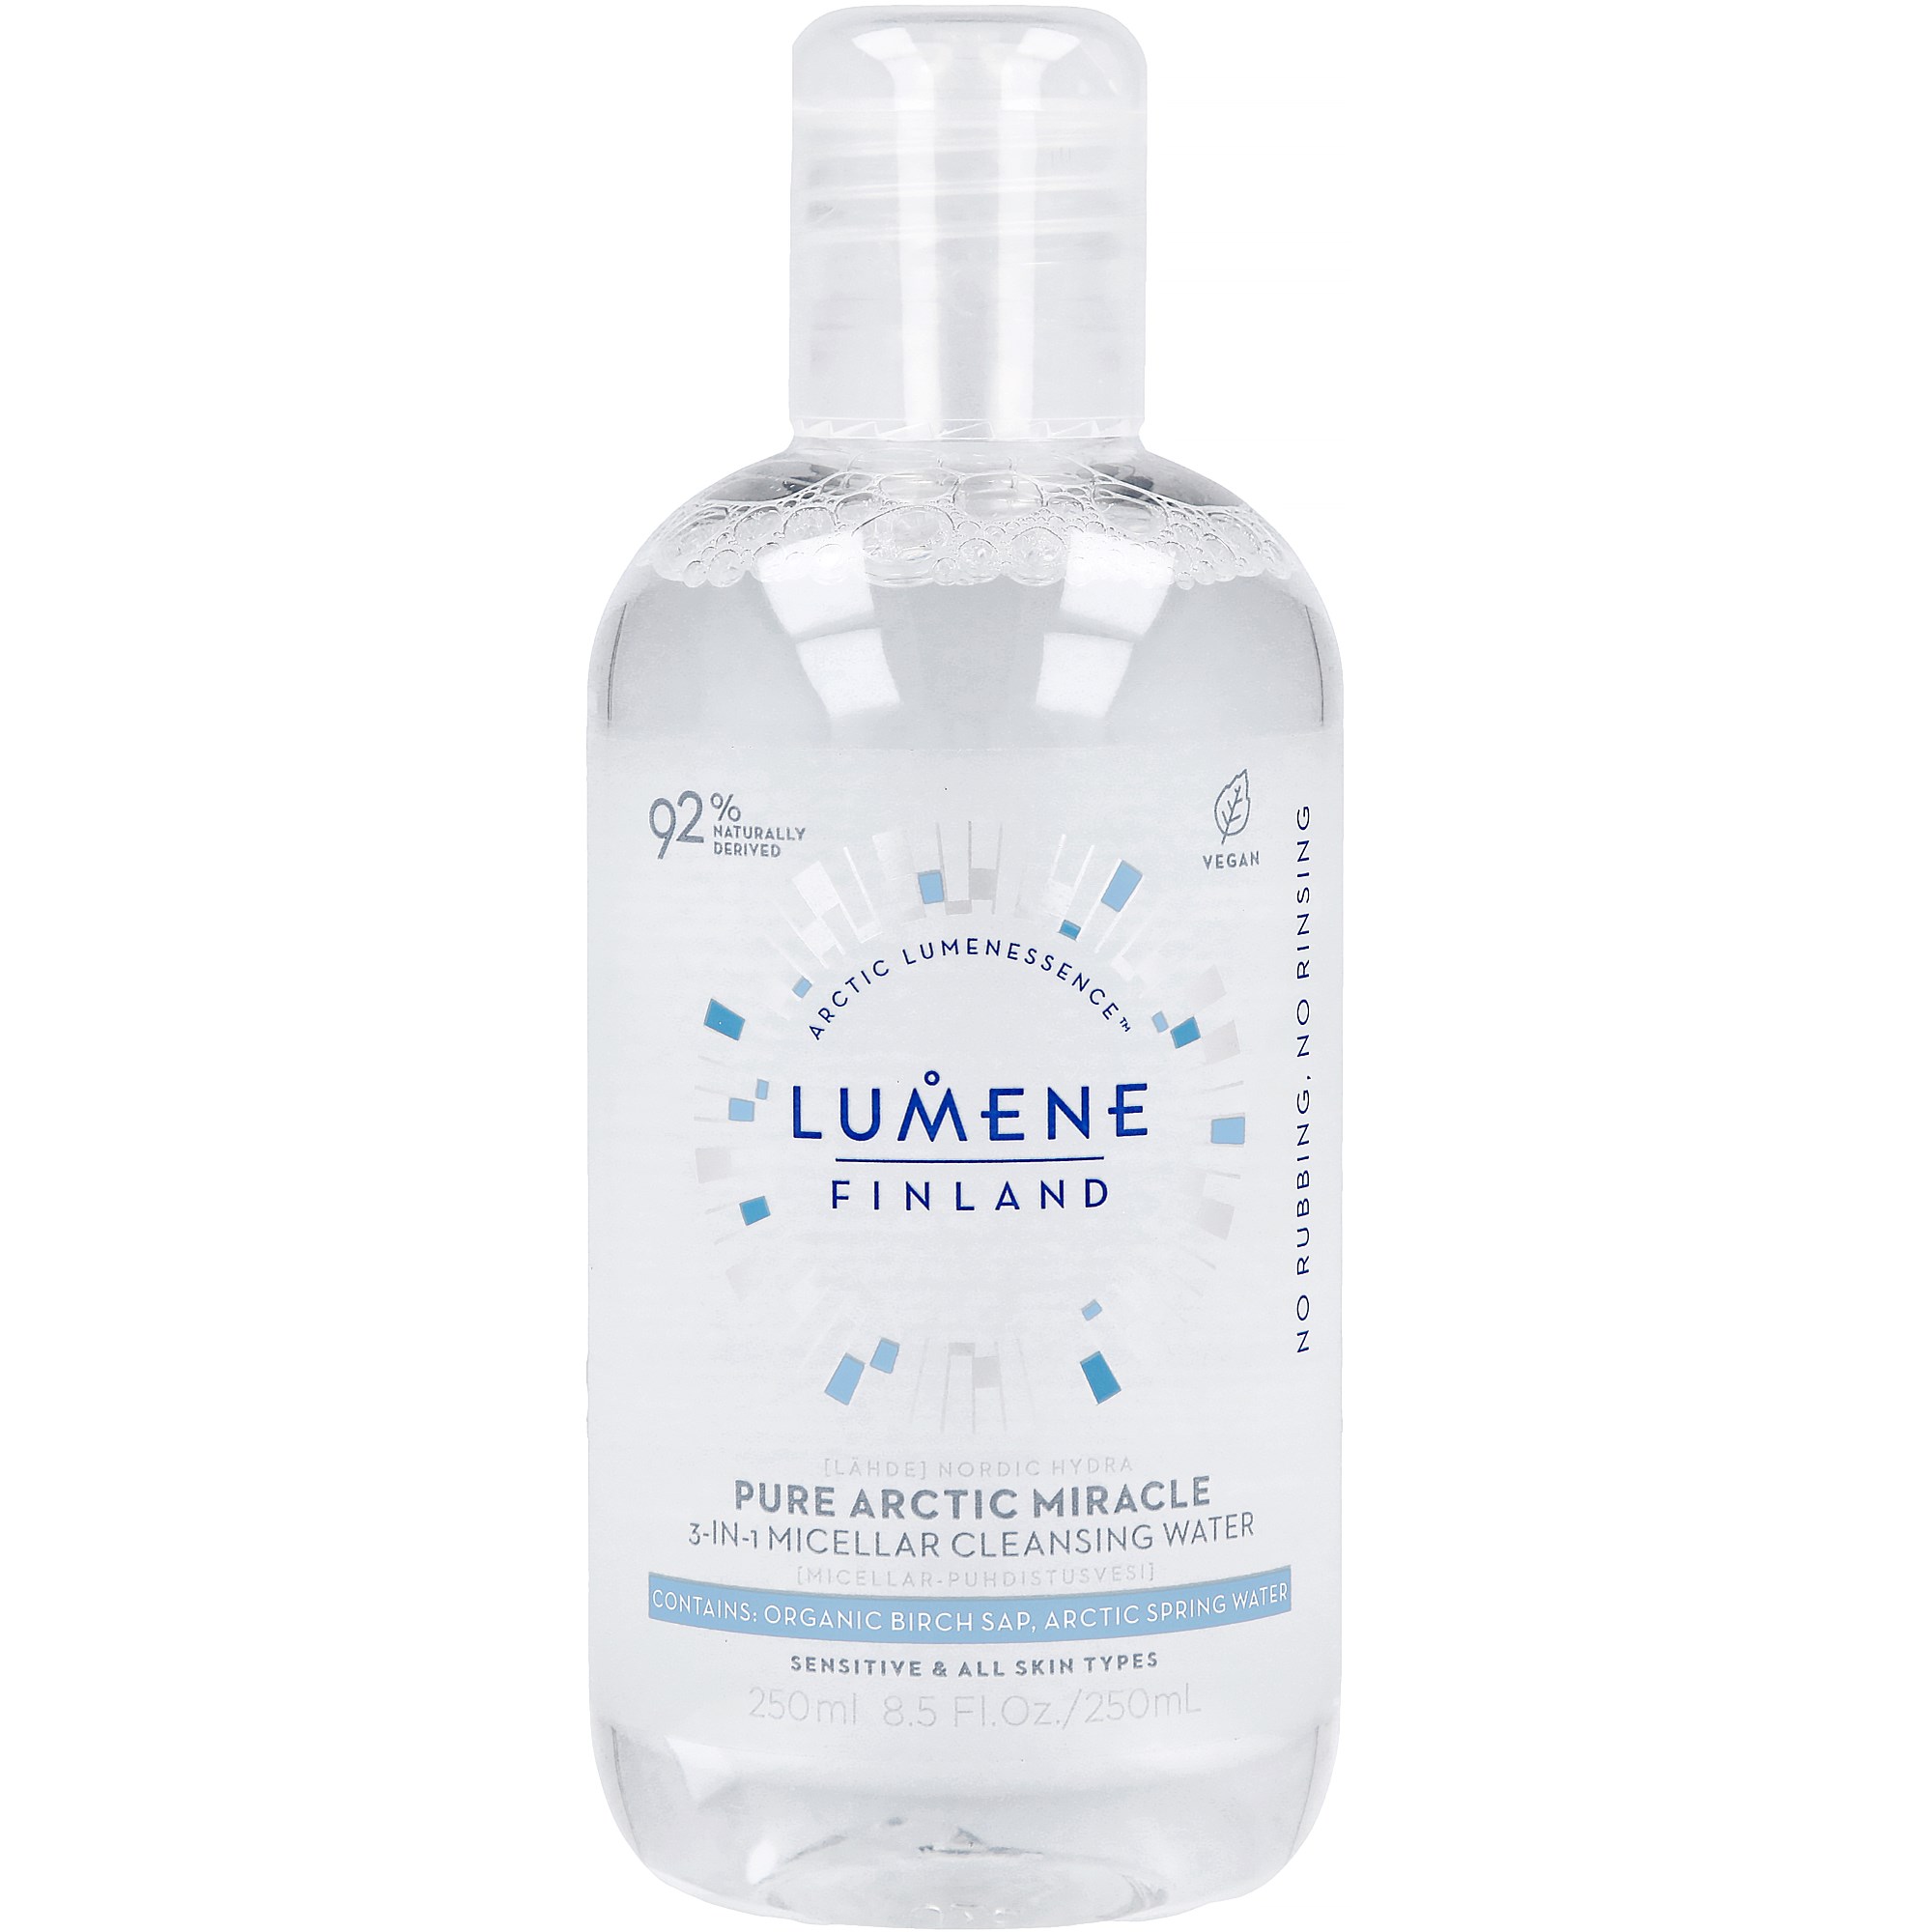 Lumene Lähde Pure Arctic Miracle 3-in-1 Micellar Cleansing Water 250 m